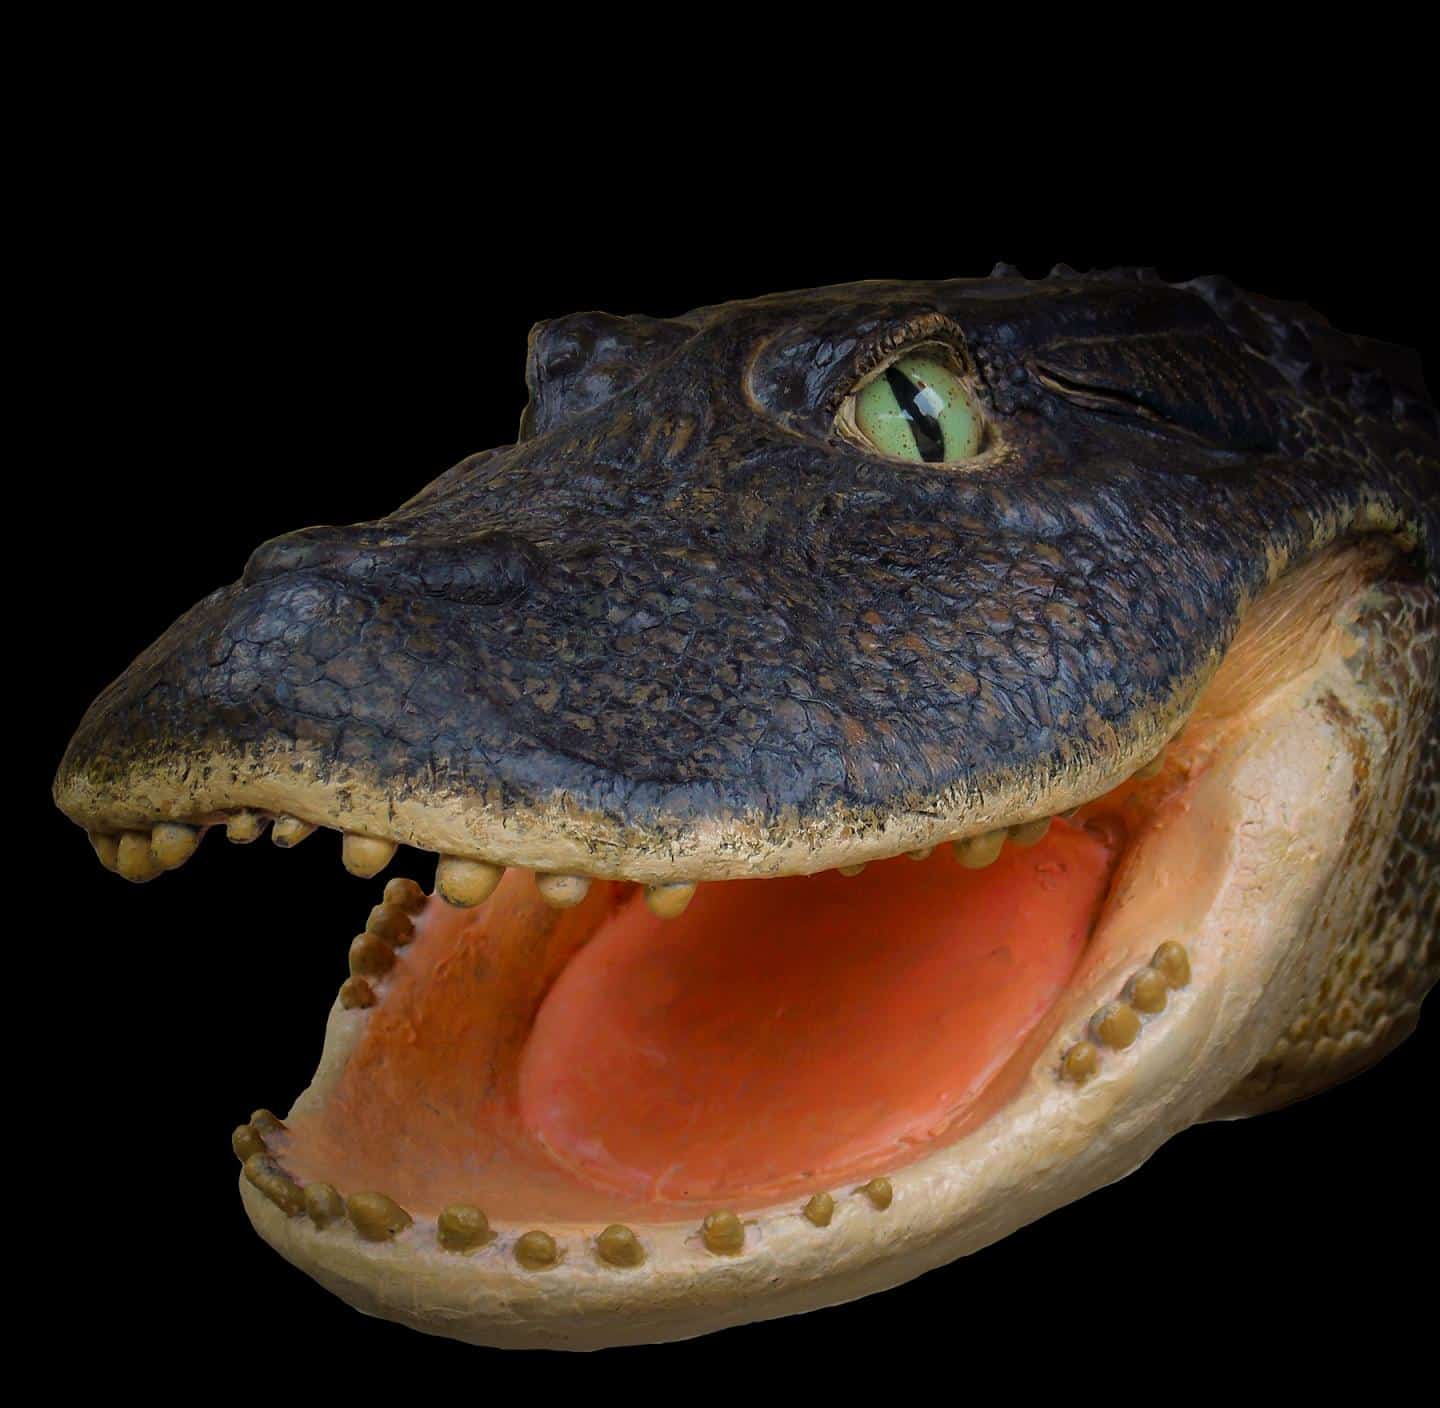 A reconstruction of Gnatusuchus pebasensis, a 13-million-year-old, short-faced crocodile with globular teeth. Scientists think it used its snout to scoop up clams from mud. Before the Amazon River formed, massive wetlands that once sat in the Amazon basin were home to an unprecedented diversity of crocs.